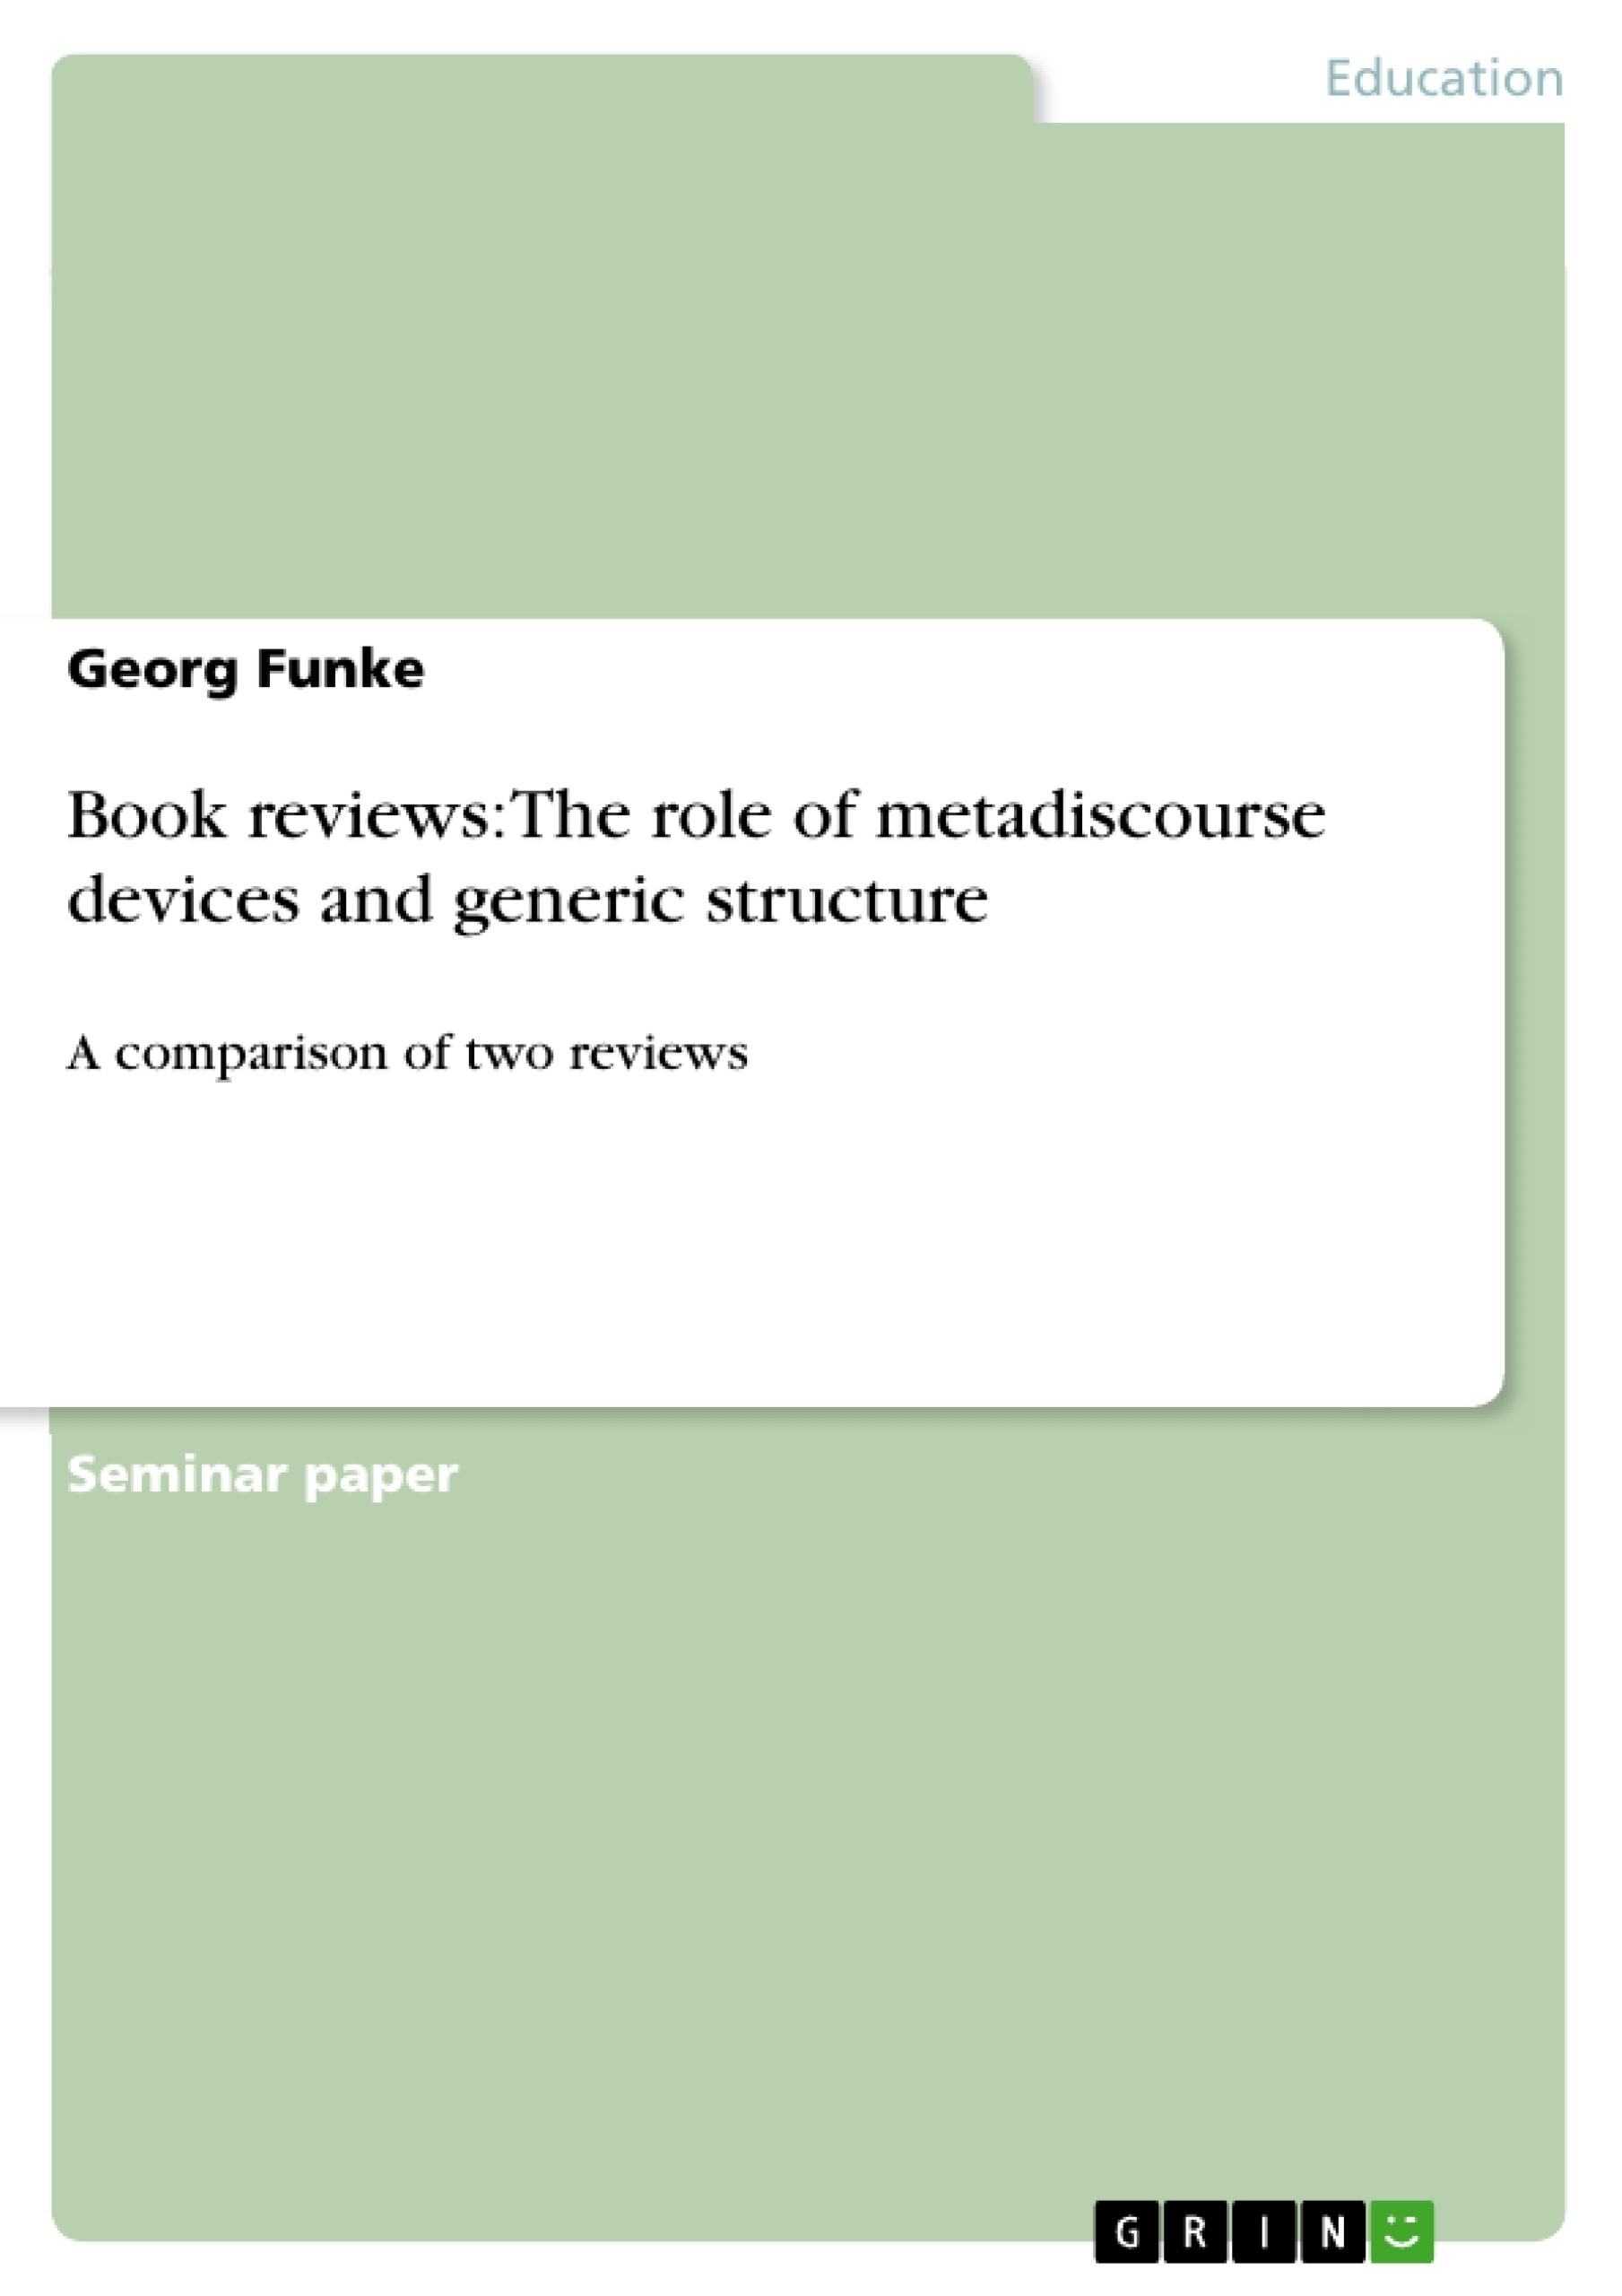 Title: Book reviews: The role of metadiscourse devices and generic structure